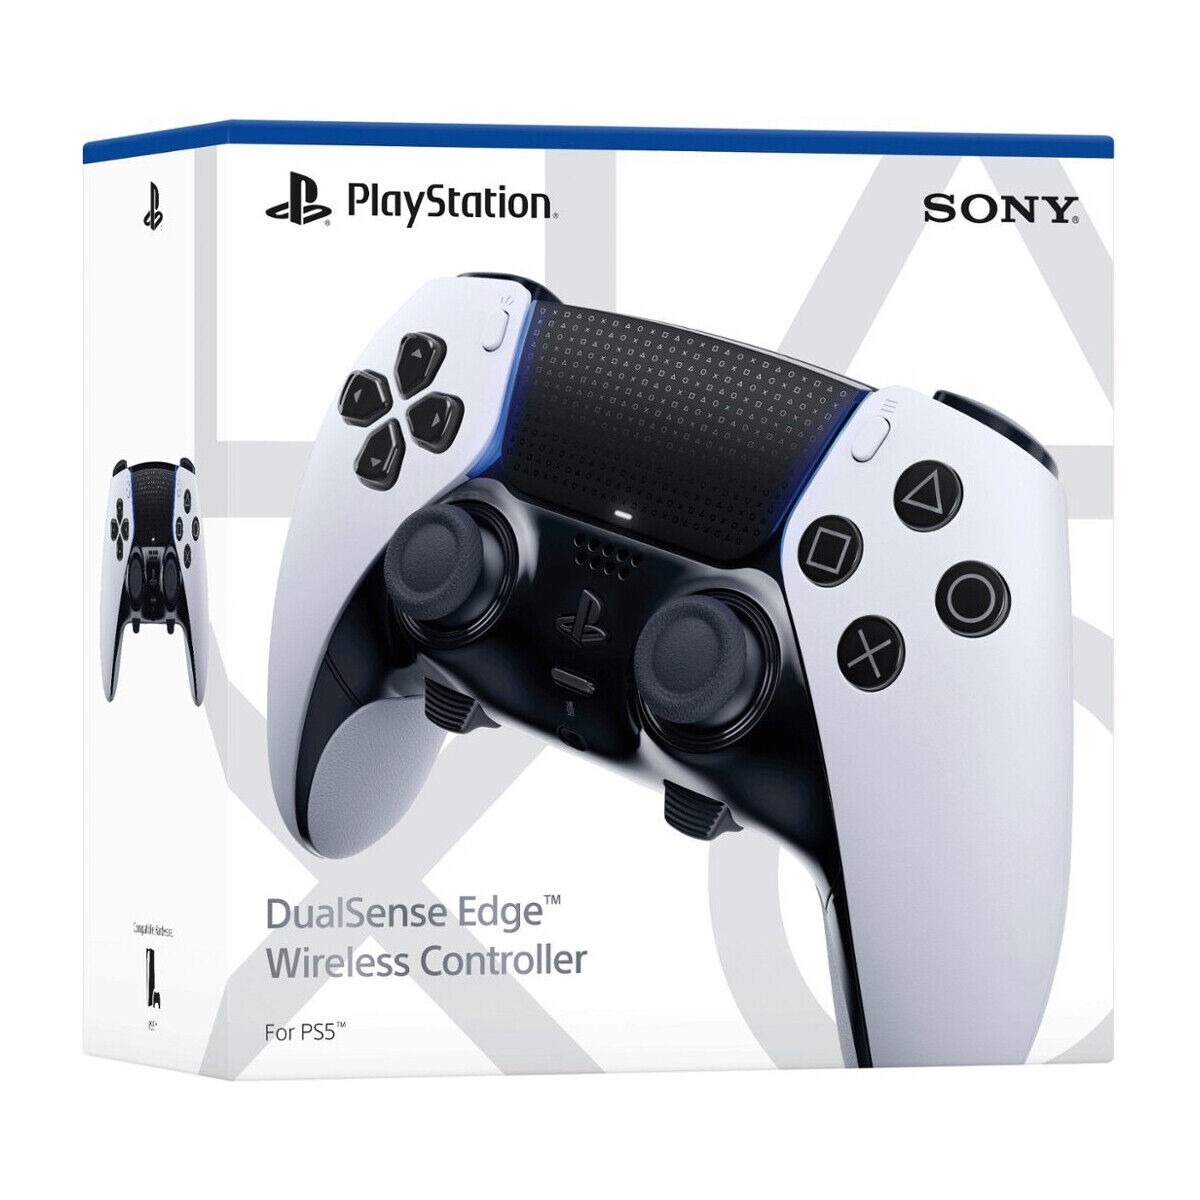 Sony DualSense Edge Wireless Controller for PlayStation 5 - White